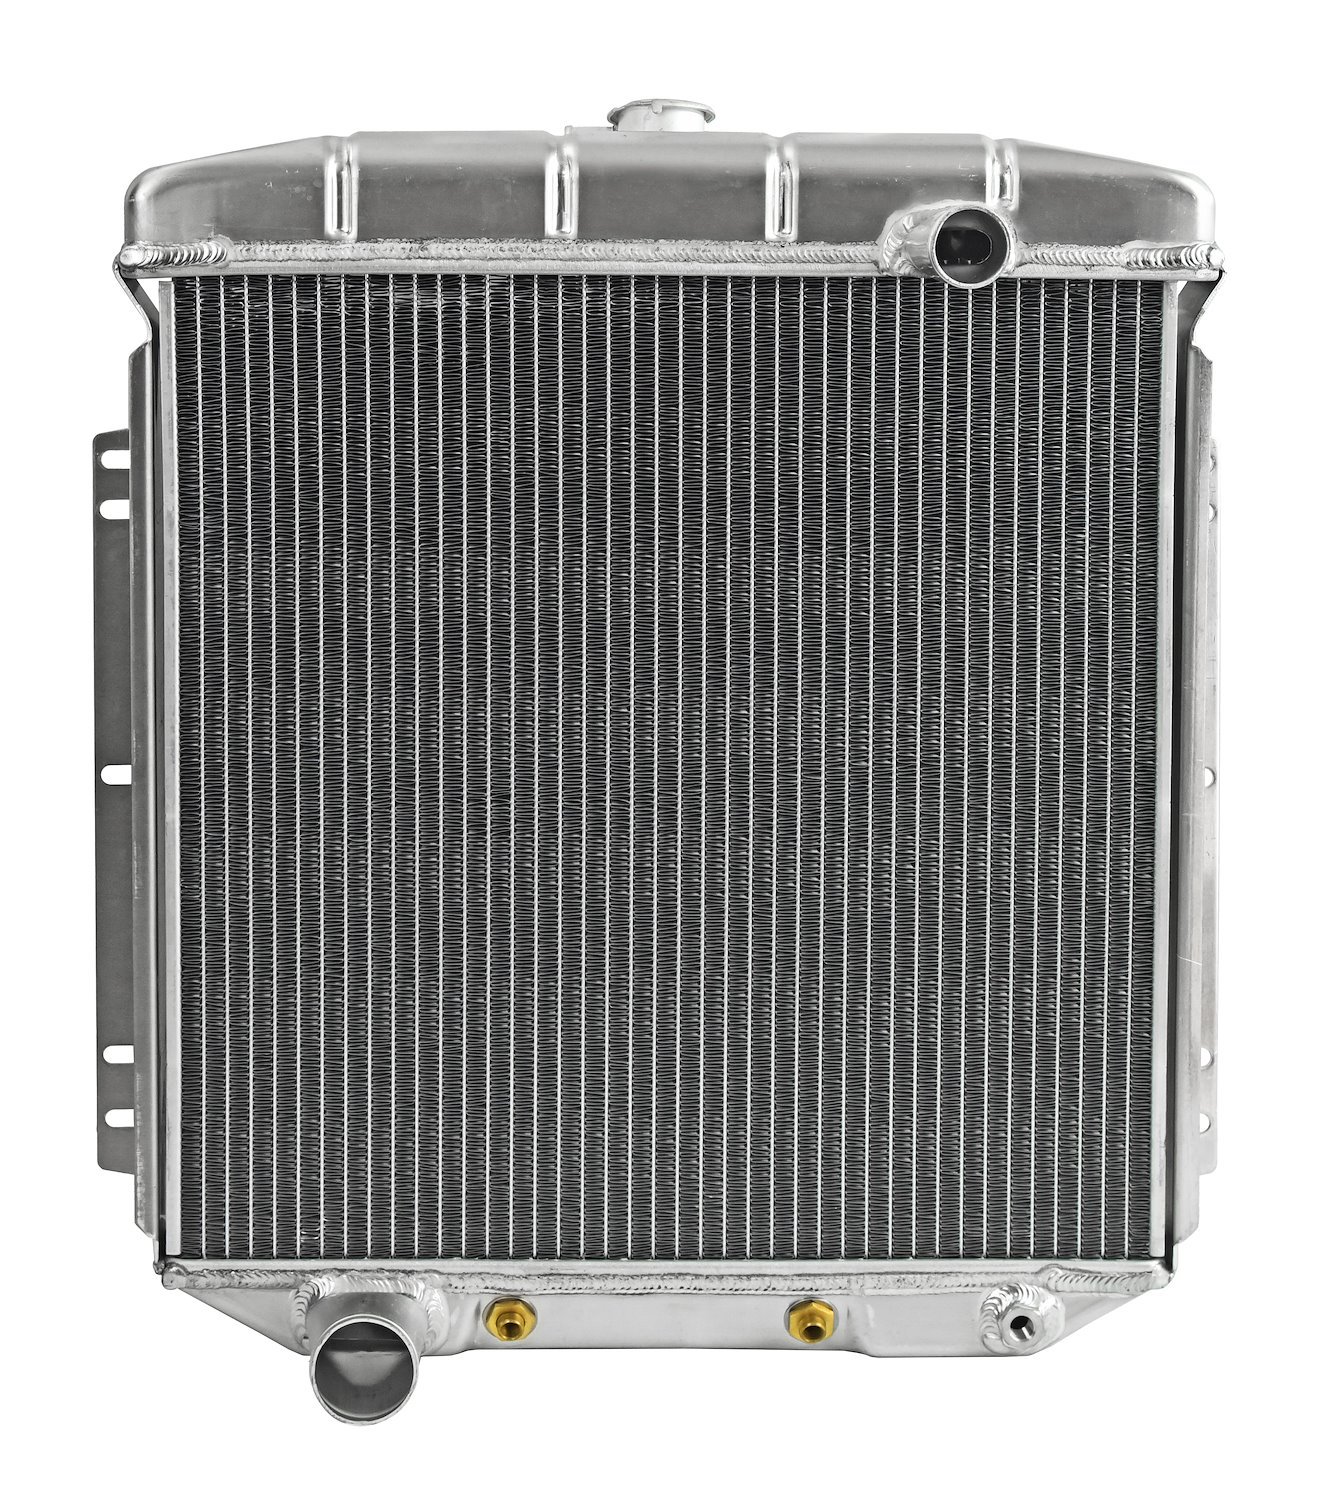 Reproduction Aluminum Radiator for Select 1954-1956 Ford Passenger Cars